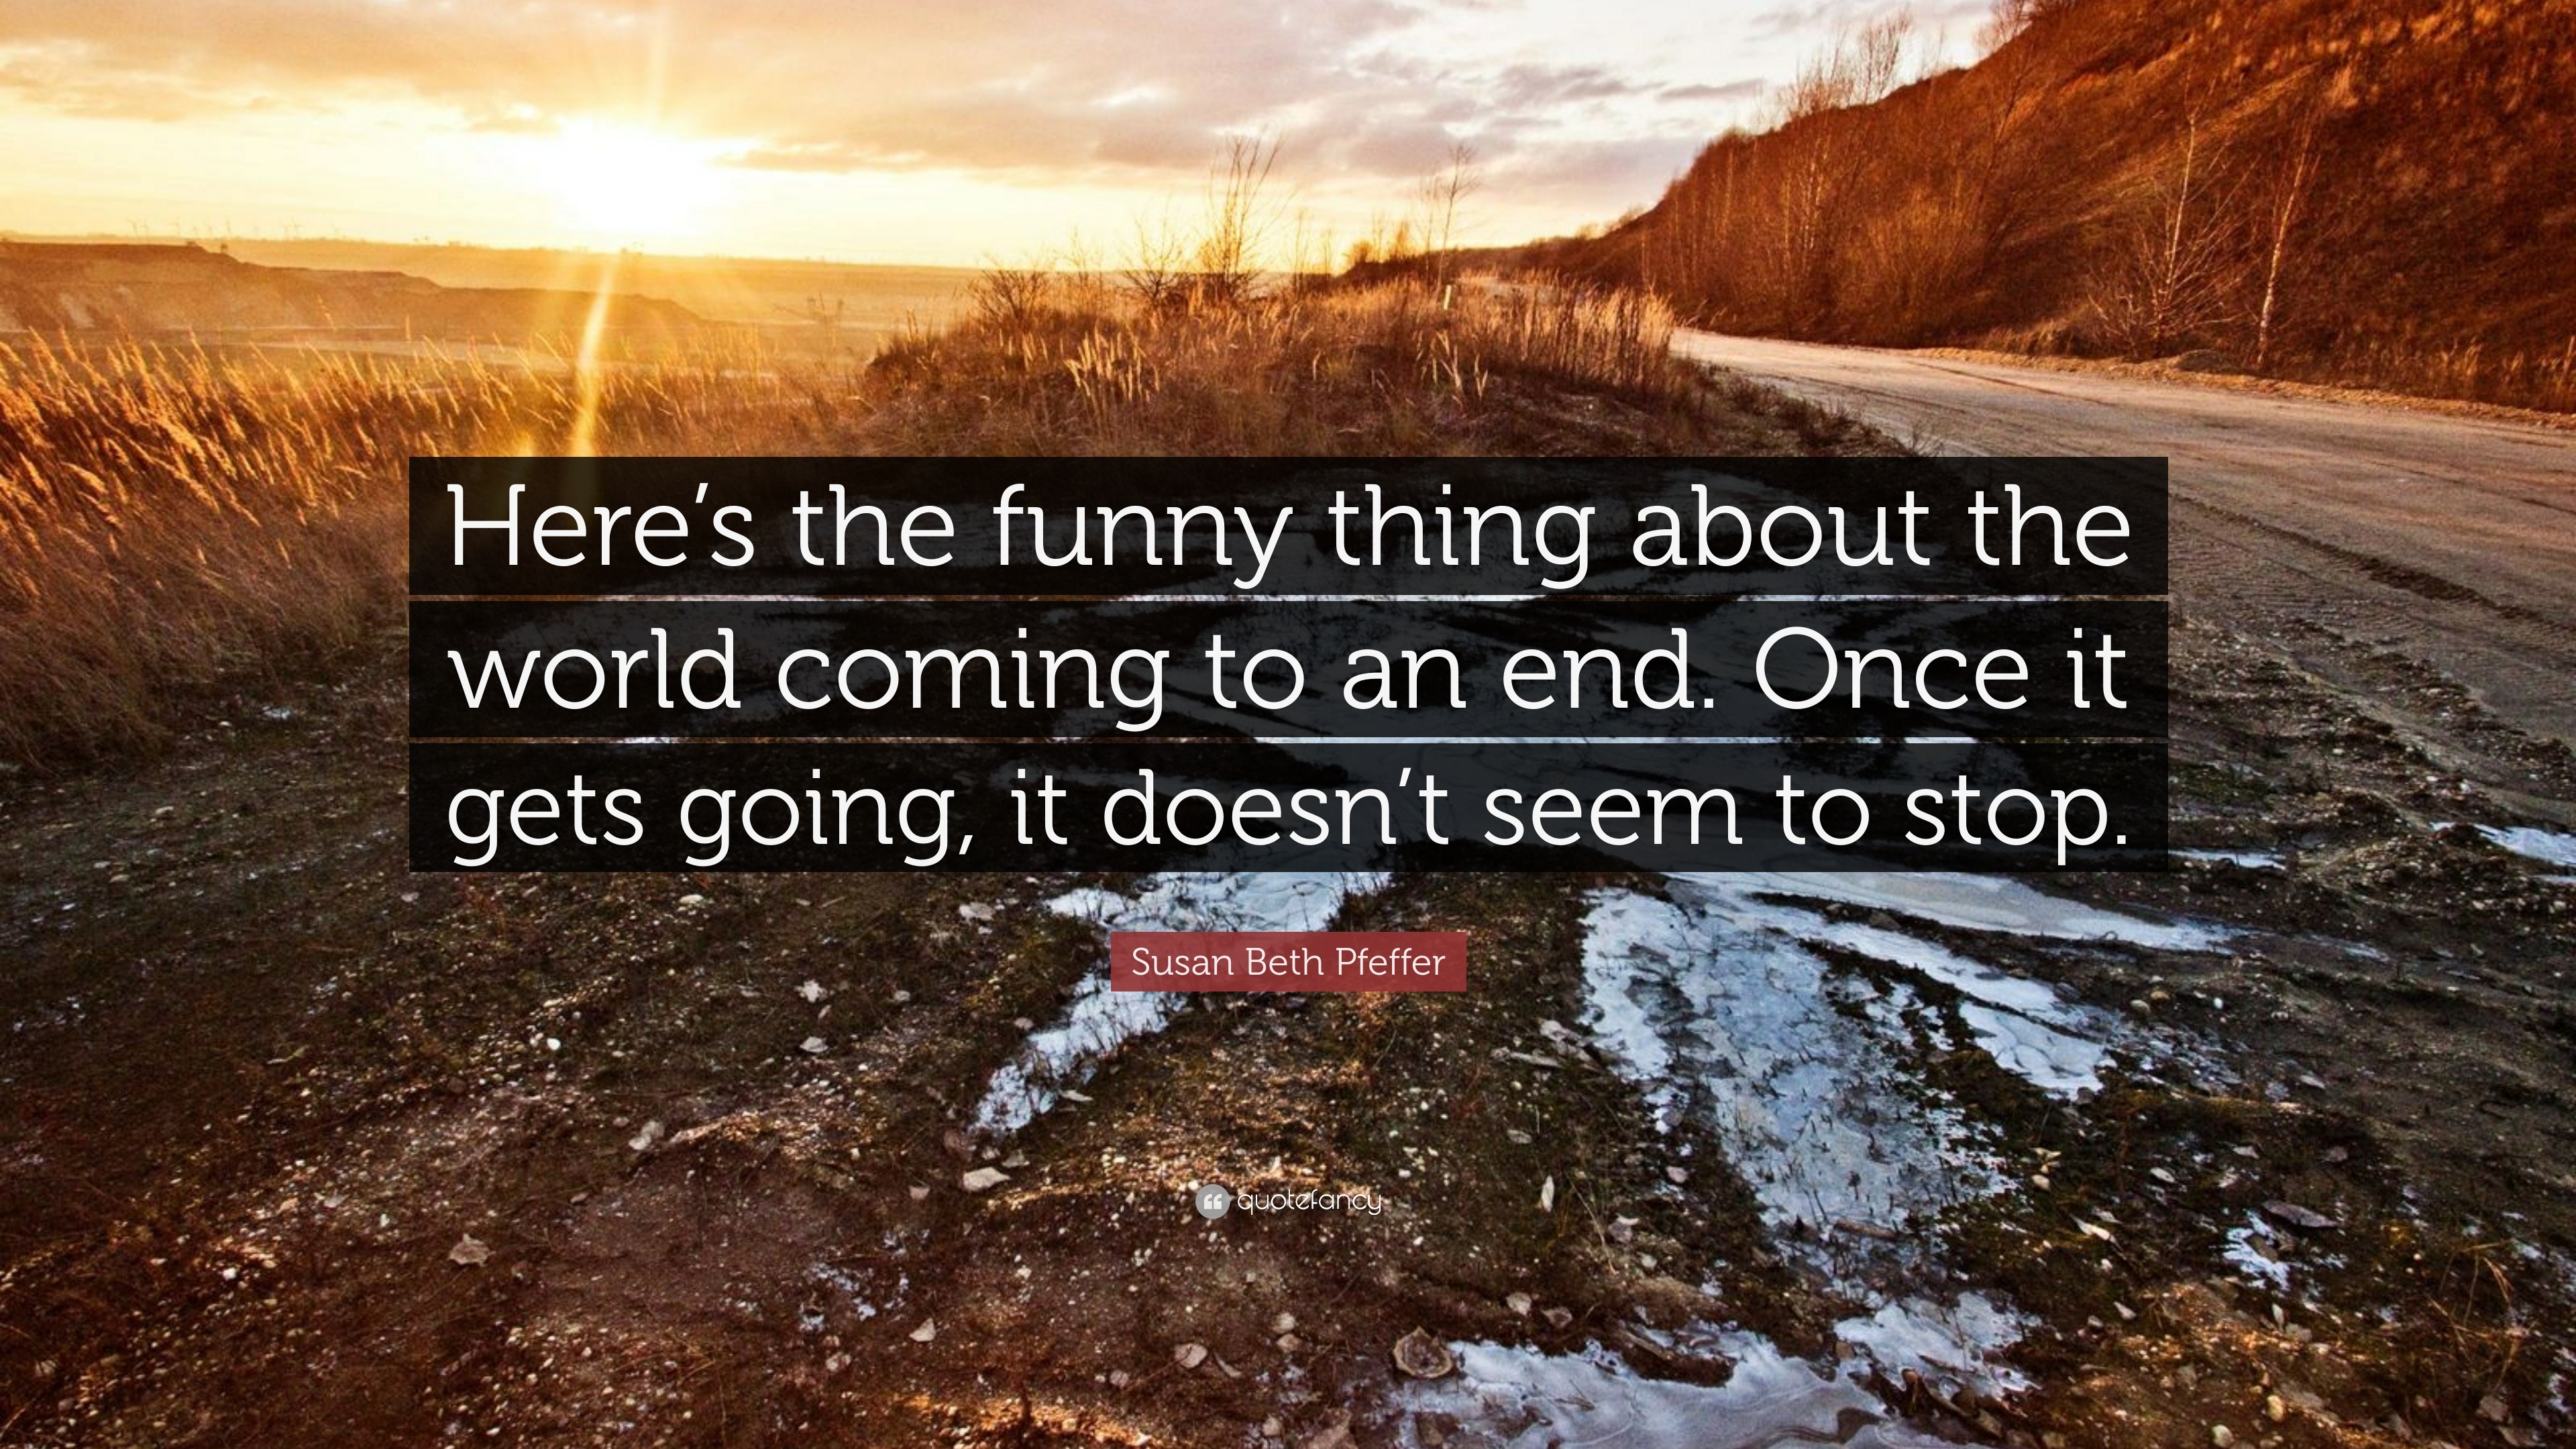 Susan Beth Pfeffer Quote: “Here's the funny thing about the world coming to  an end. Once